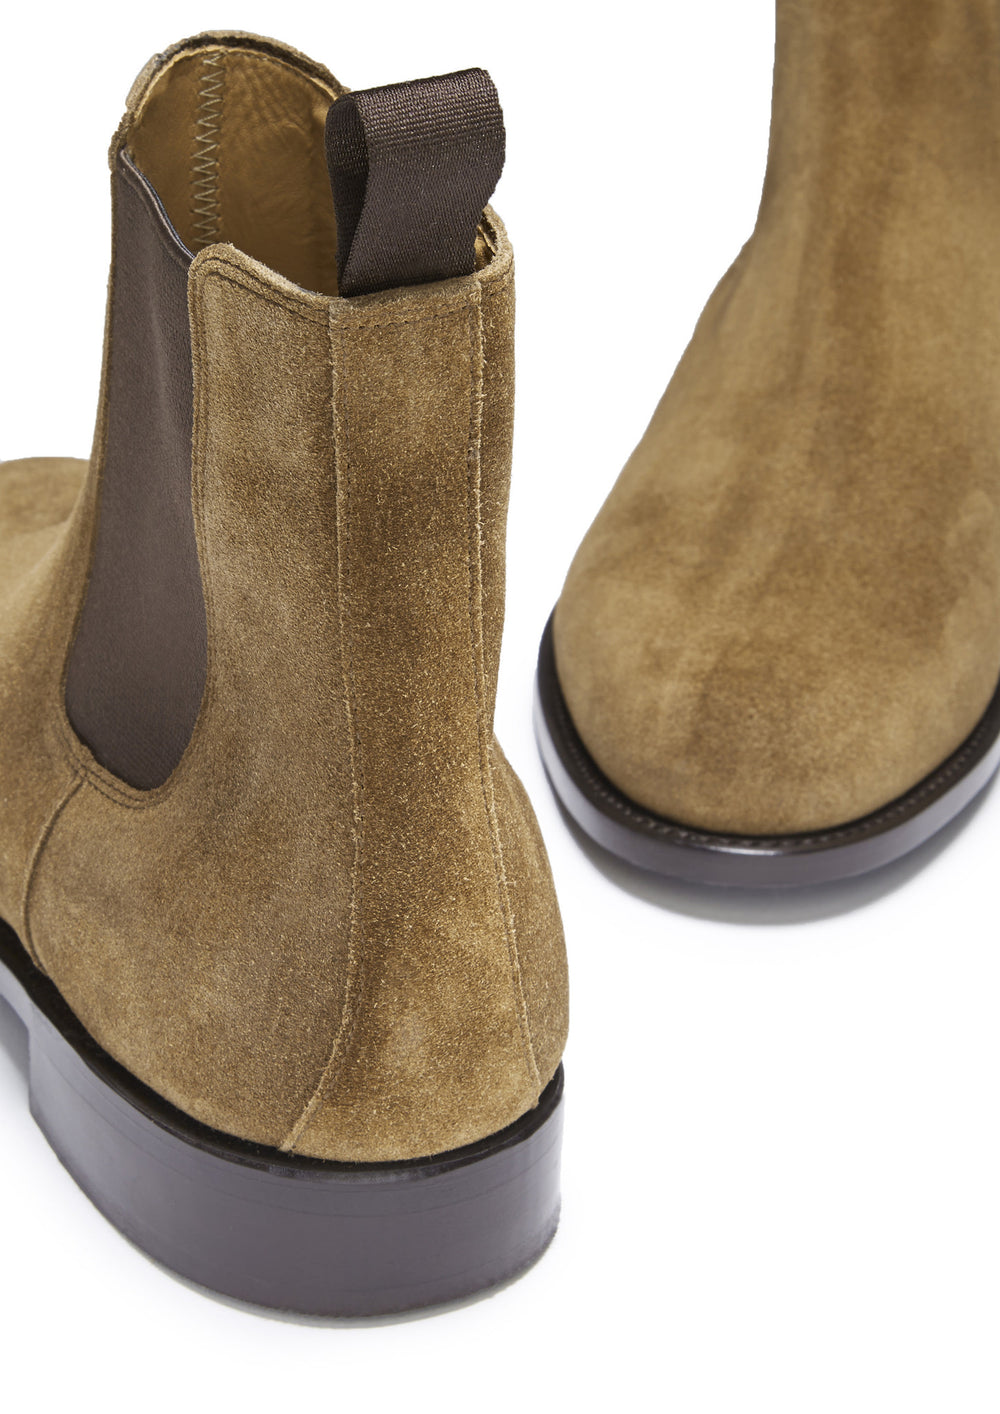 Tobacco Suede Chelsea Boots, Welted Leather Sole - Hugs & Co.